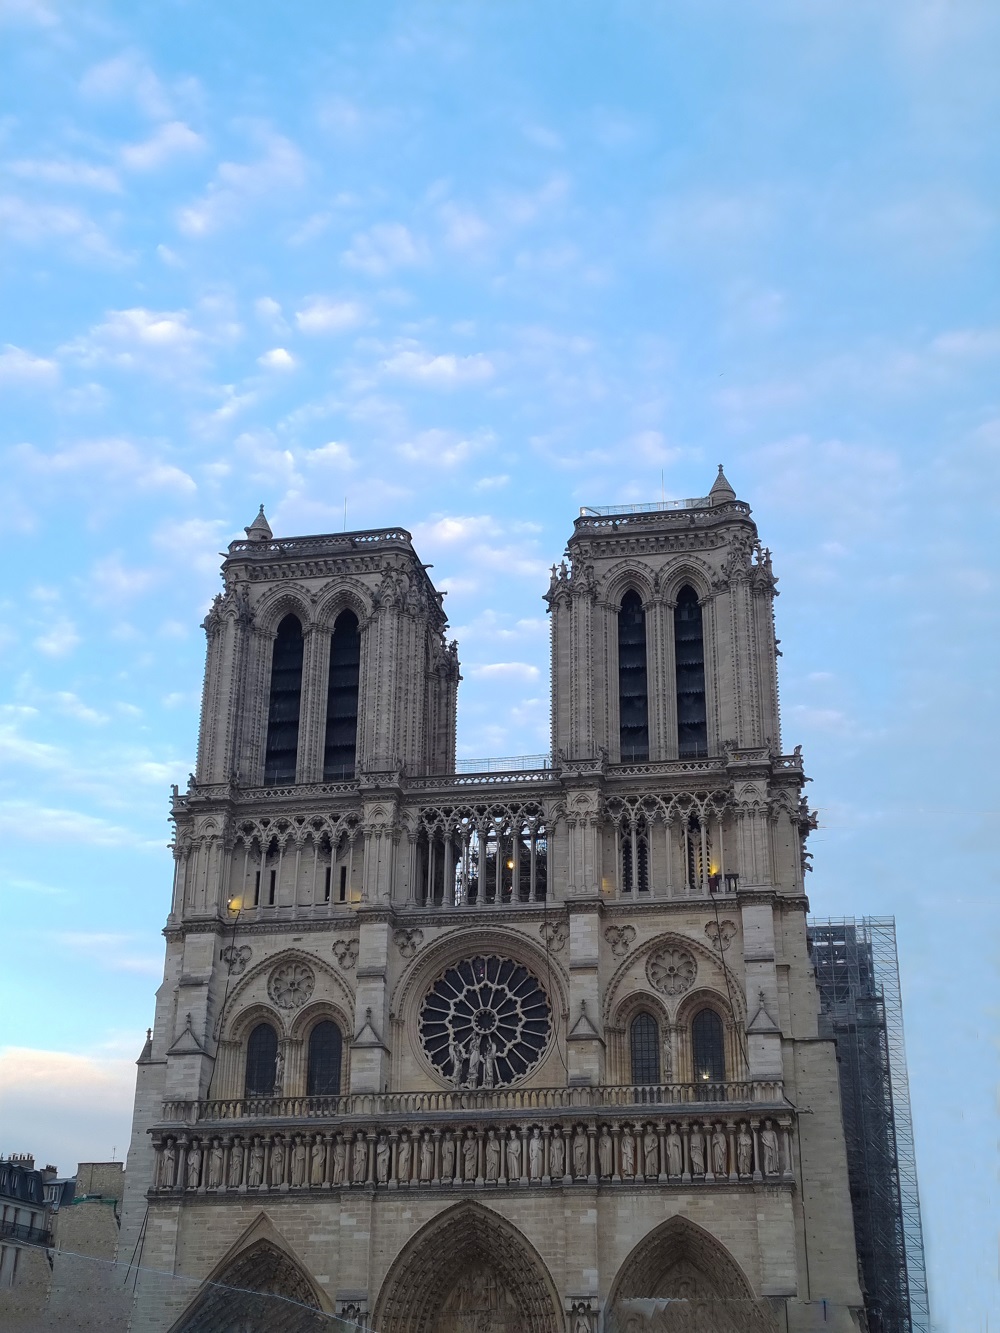 The Notre Dame Cathedral